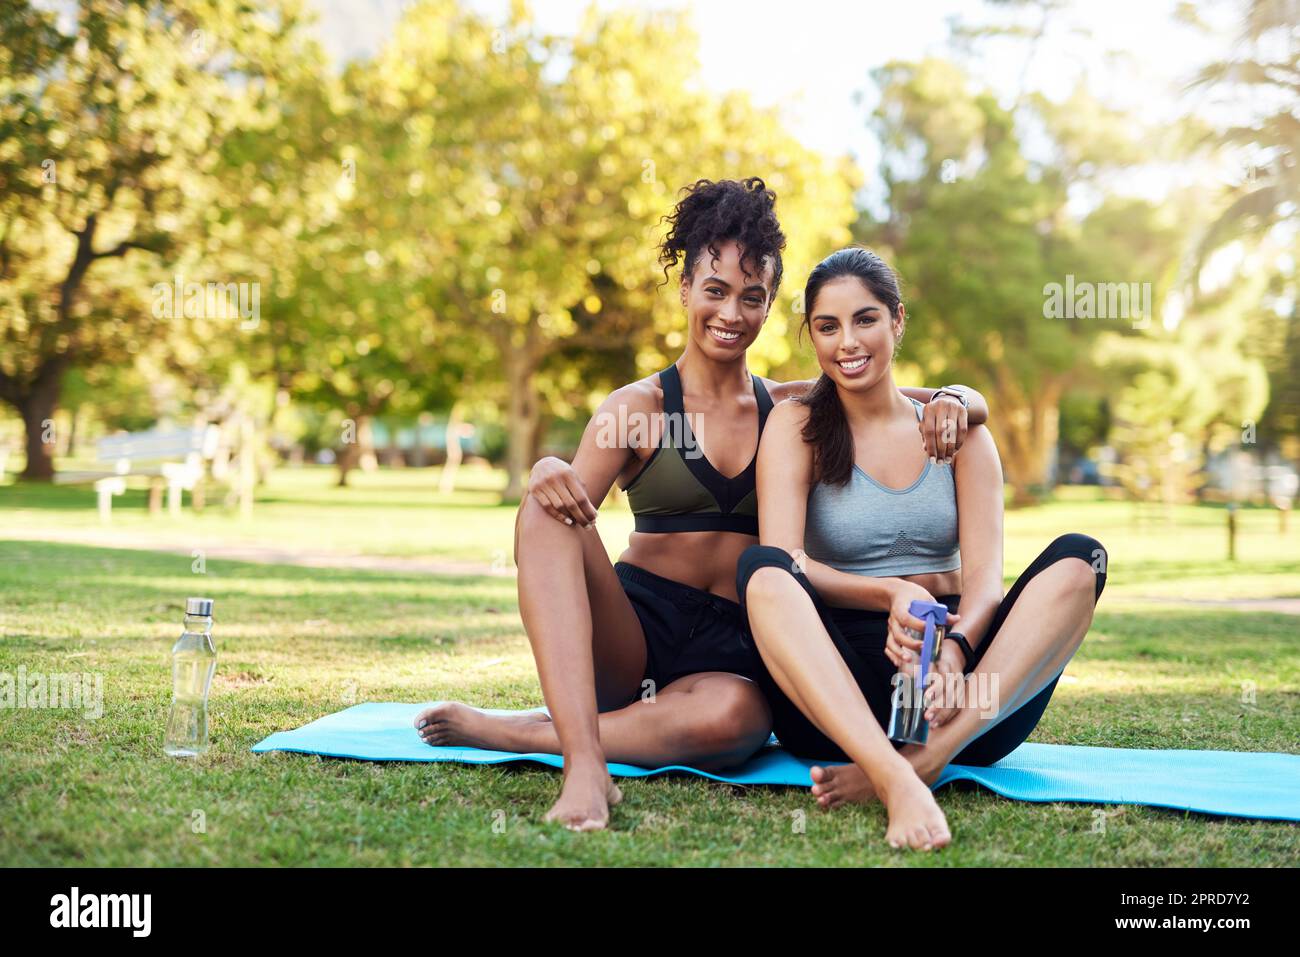 Together, we can accomplish anything. Full length portrait of two attractive young women sitting close to each other and smiling while in the park. Stock Photo